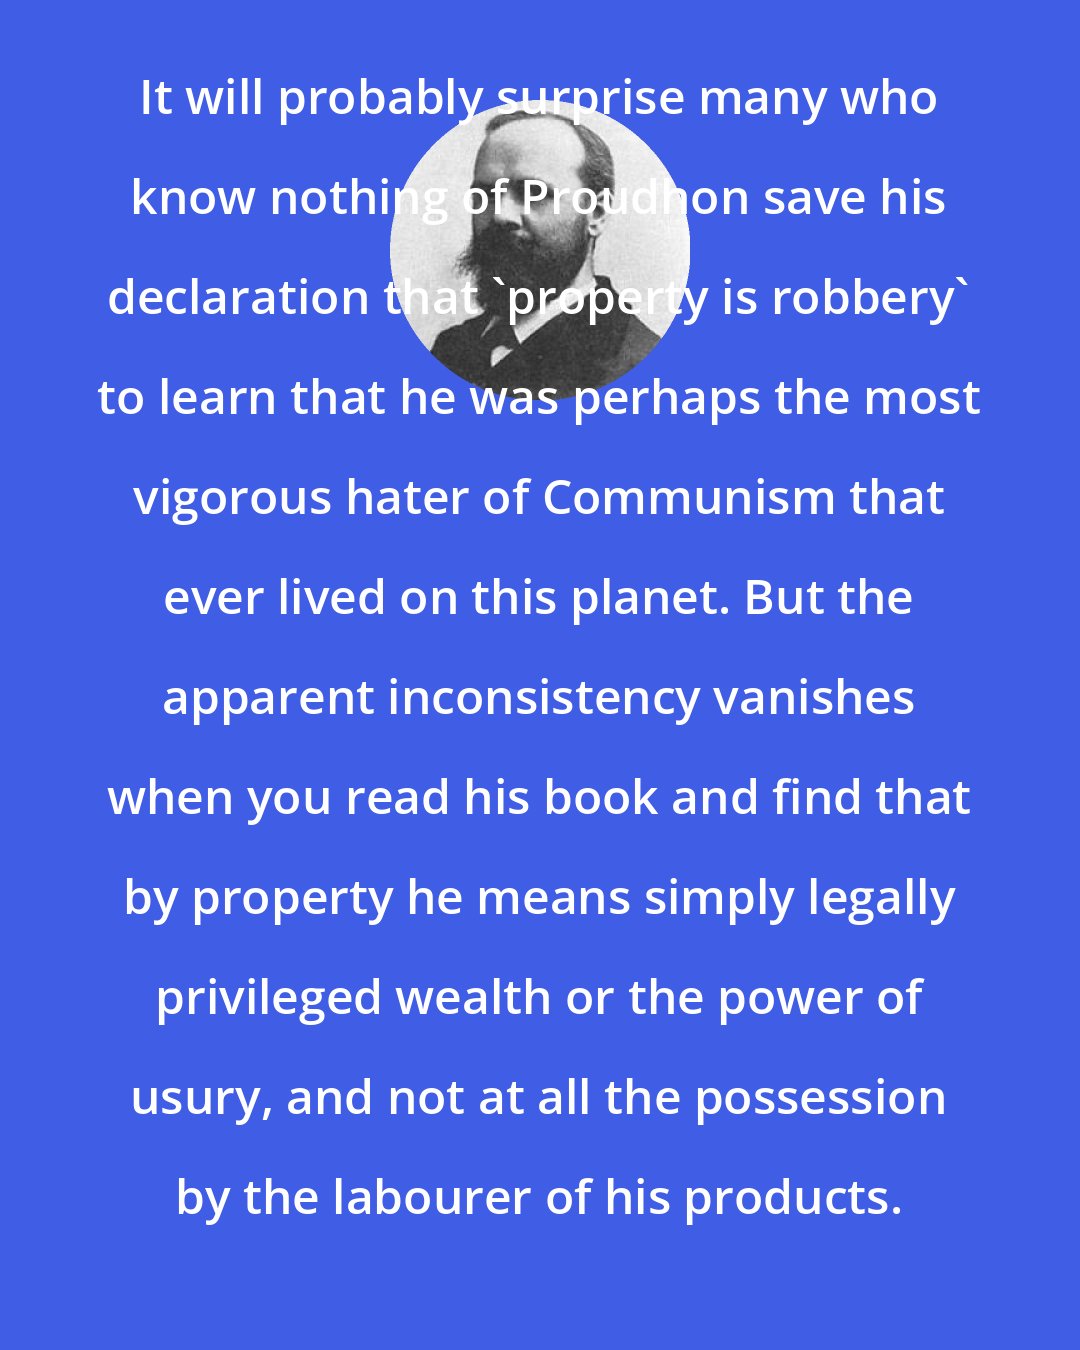 Benjamin Tucker: It will probably surprise many who know nothing of Proudhon save his declaration that 'property is robbery' to learn that he was perhaps the most vigorous hater of Communism that ever lived on this planet. But the apparent inconsistency vanishes when you read his book and find that by property he means simply legally privileged wealth or the power of usury, and not at all the possession by the labourer of his products.